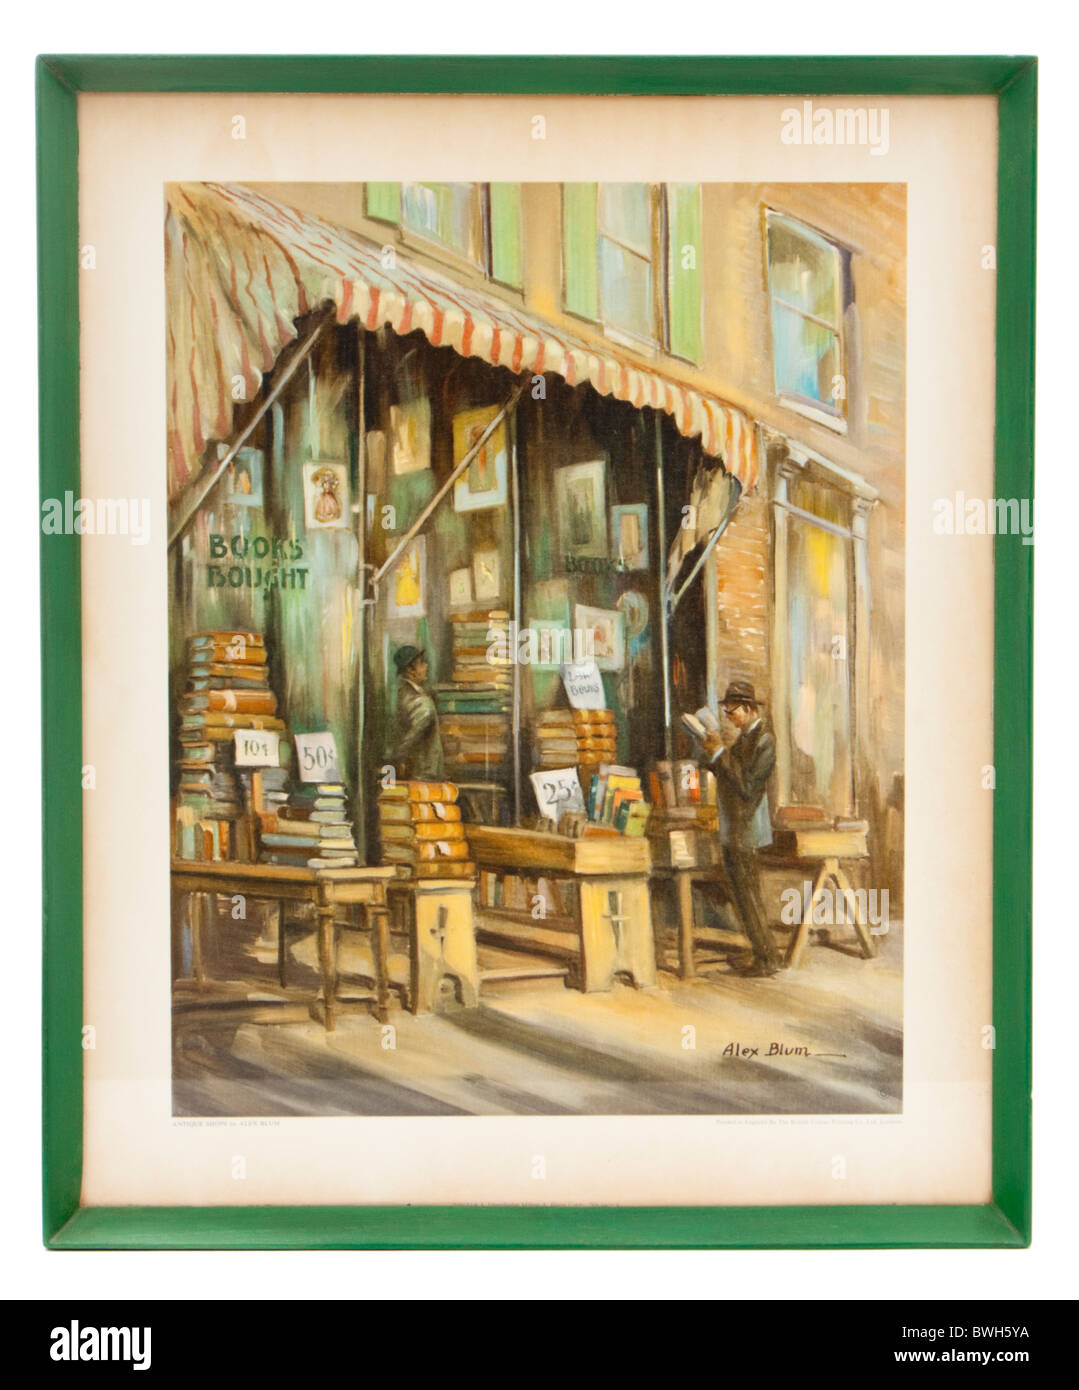 Vintage framed print of "Antique Shops" painting by Alex Blum Stock Photo